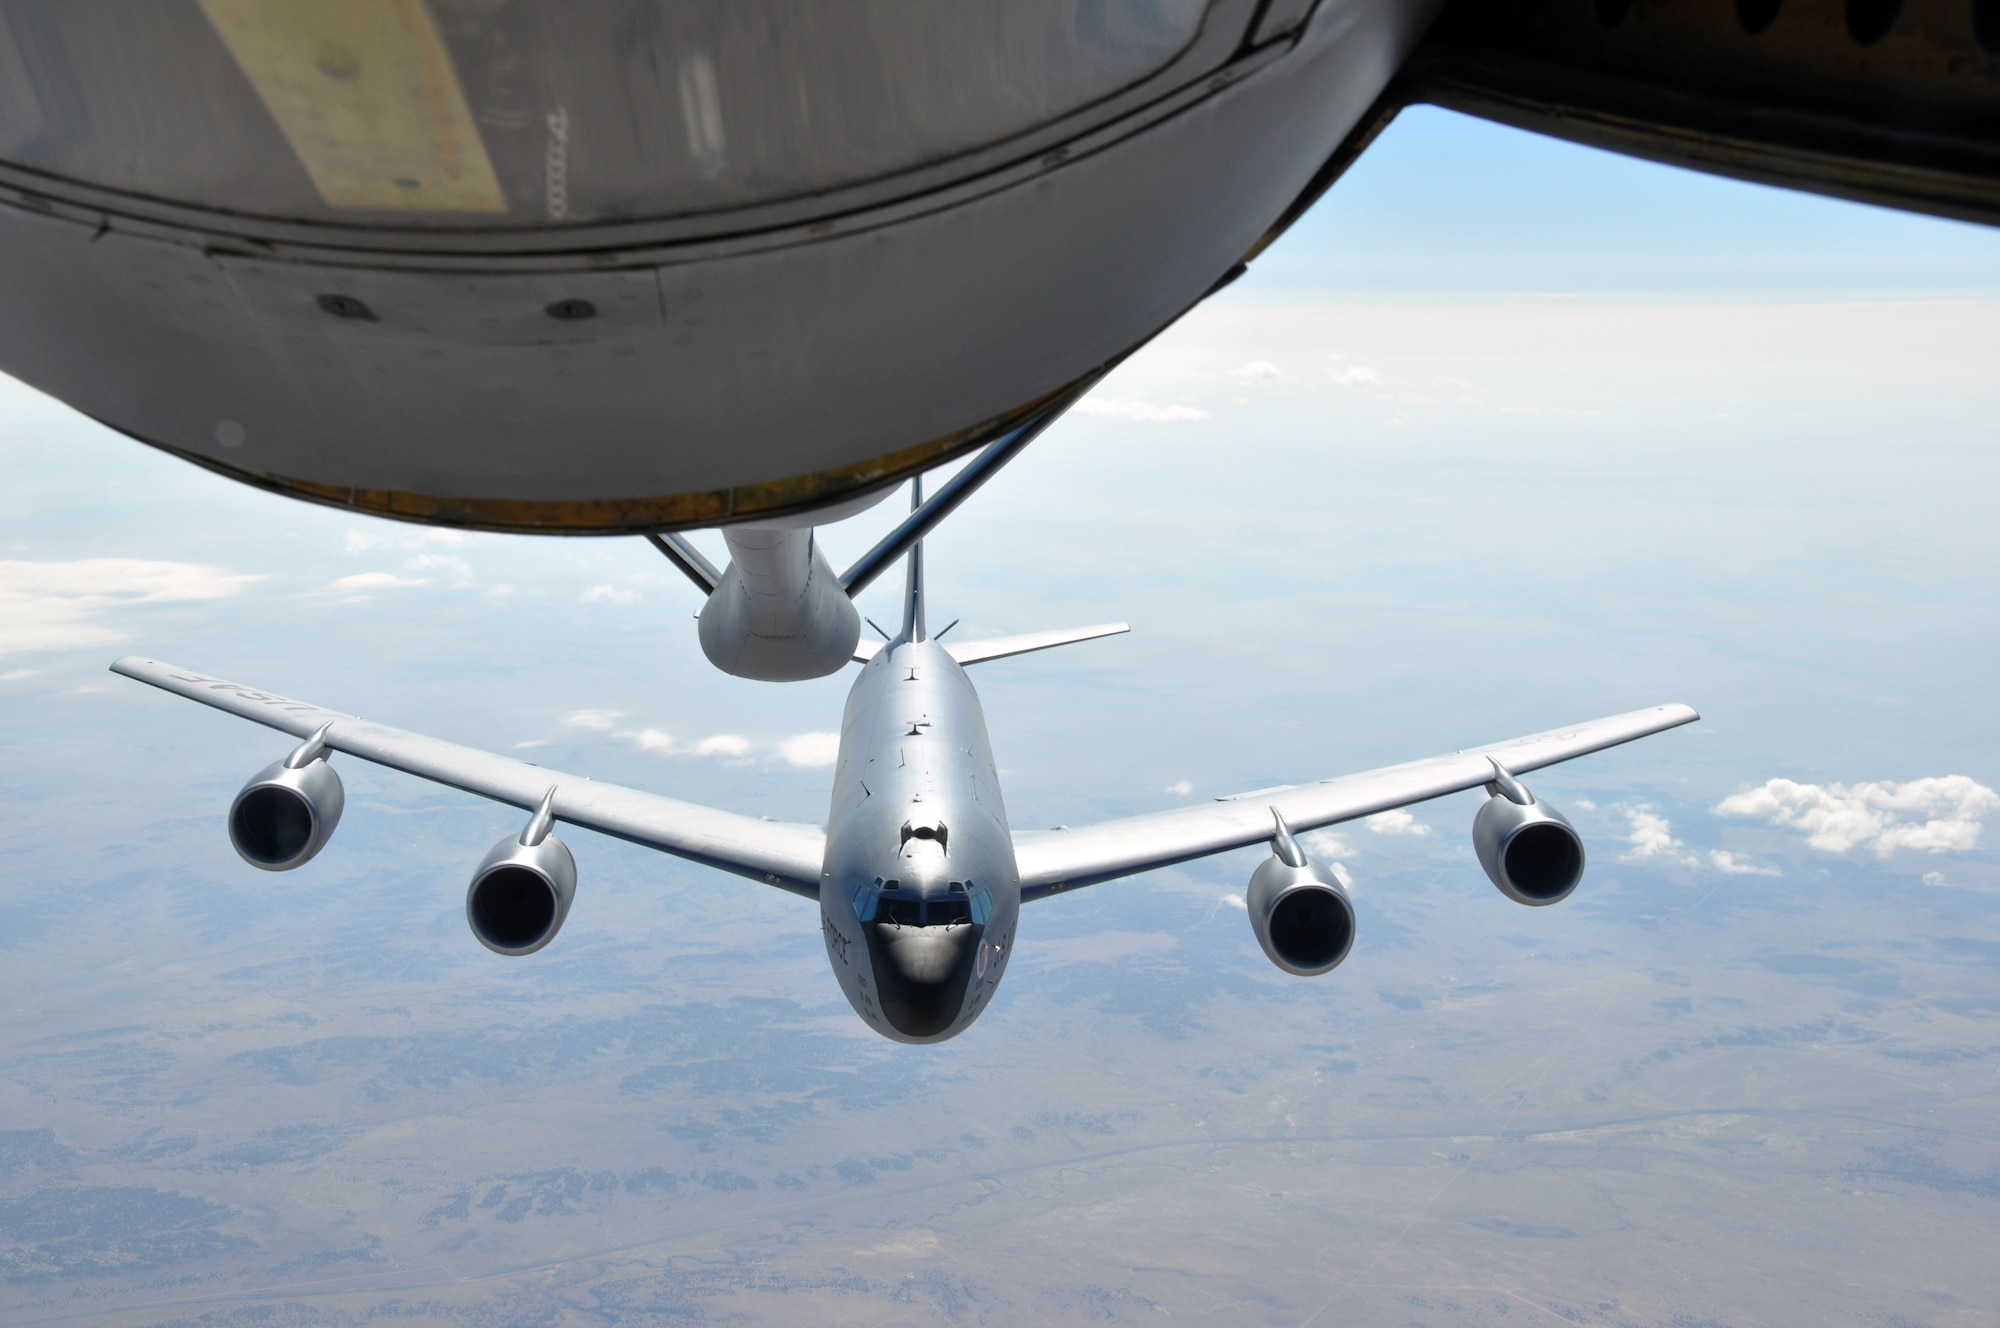 A KC-135 Stratotanker from McConnell Air Force Base, Kan., prepares to receive air refueling during a local training mission, Sept. 26, 2012.  The mission was the final local sortie of fiscal year 2012 for the Air Force Reserve 931st Air Refueling Group.  During the mission, the 931st achieved its target of flying 3,688 hours for fiscal year 2012.  (U.S. Air Force photo by 1st Lt. Zach Anderson)